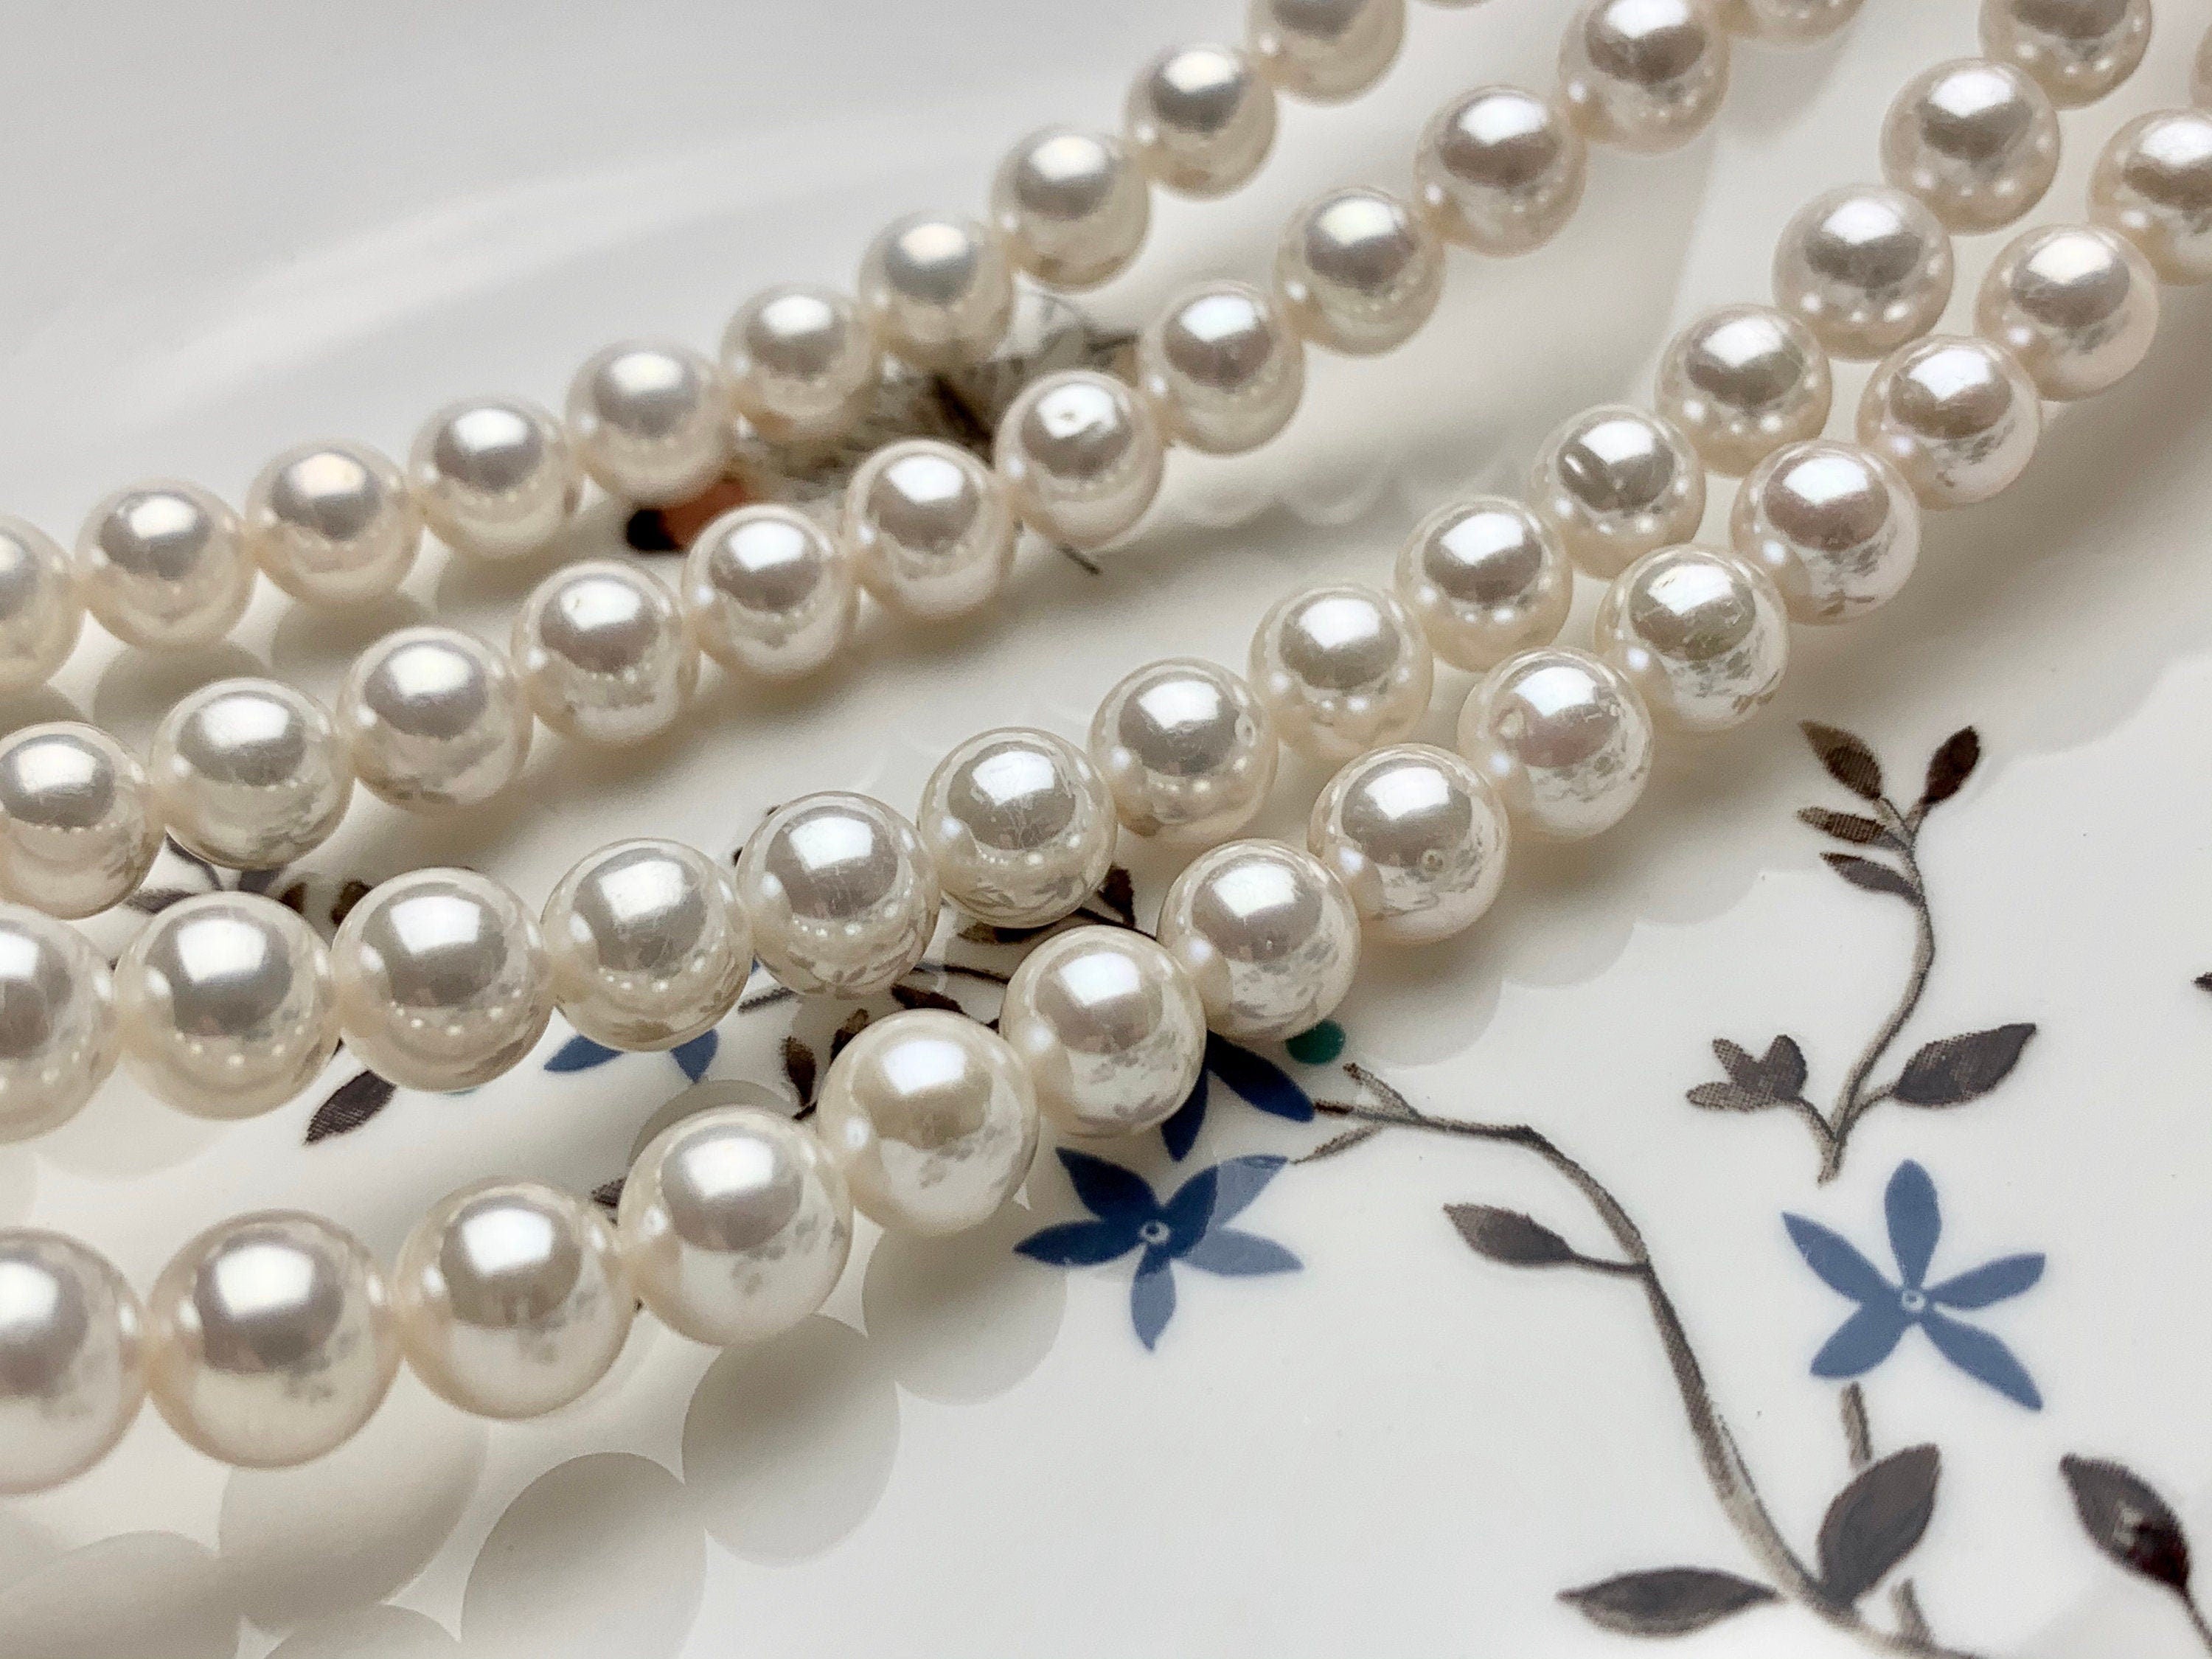 Natural Freshwater Pearl Necklace